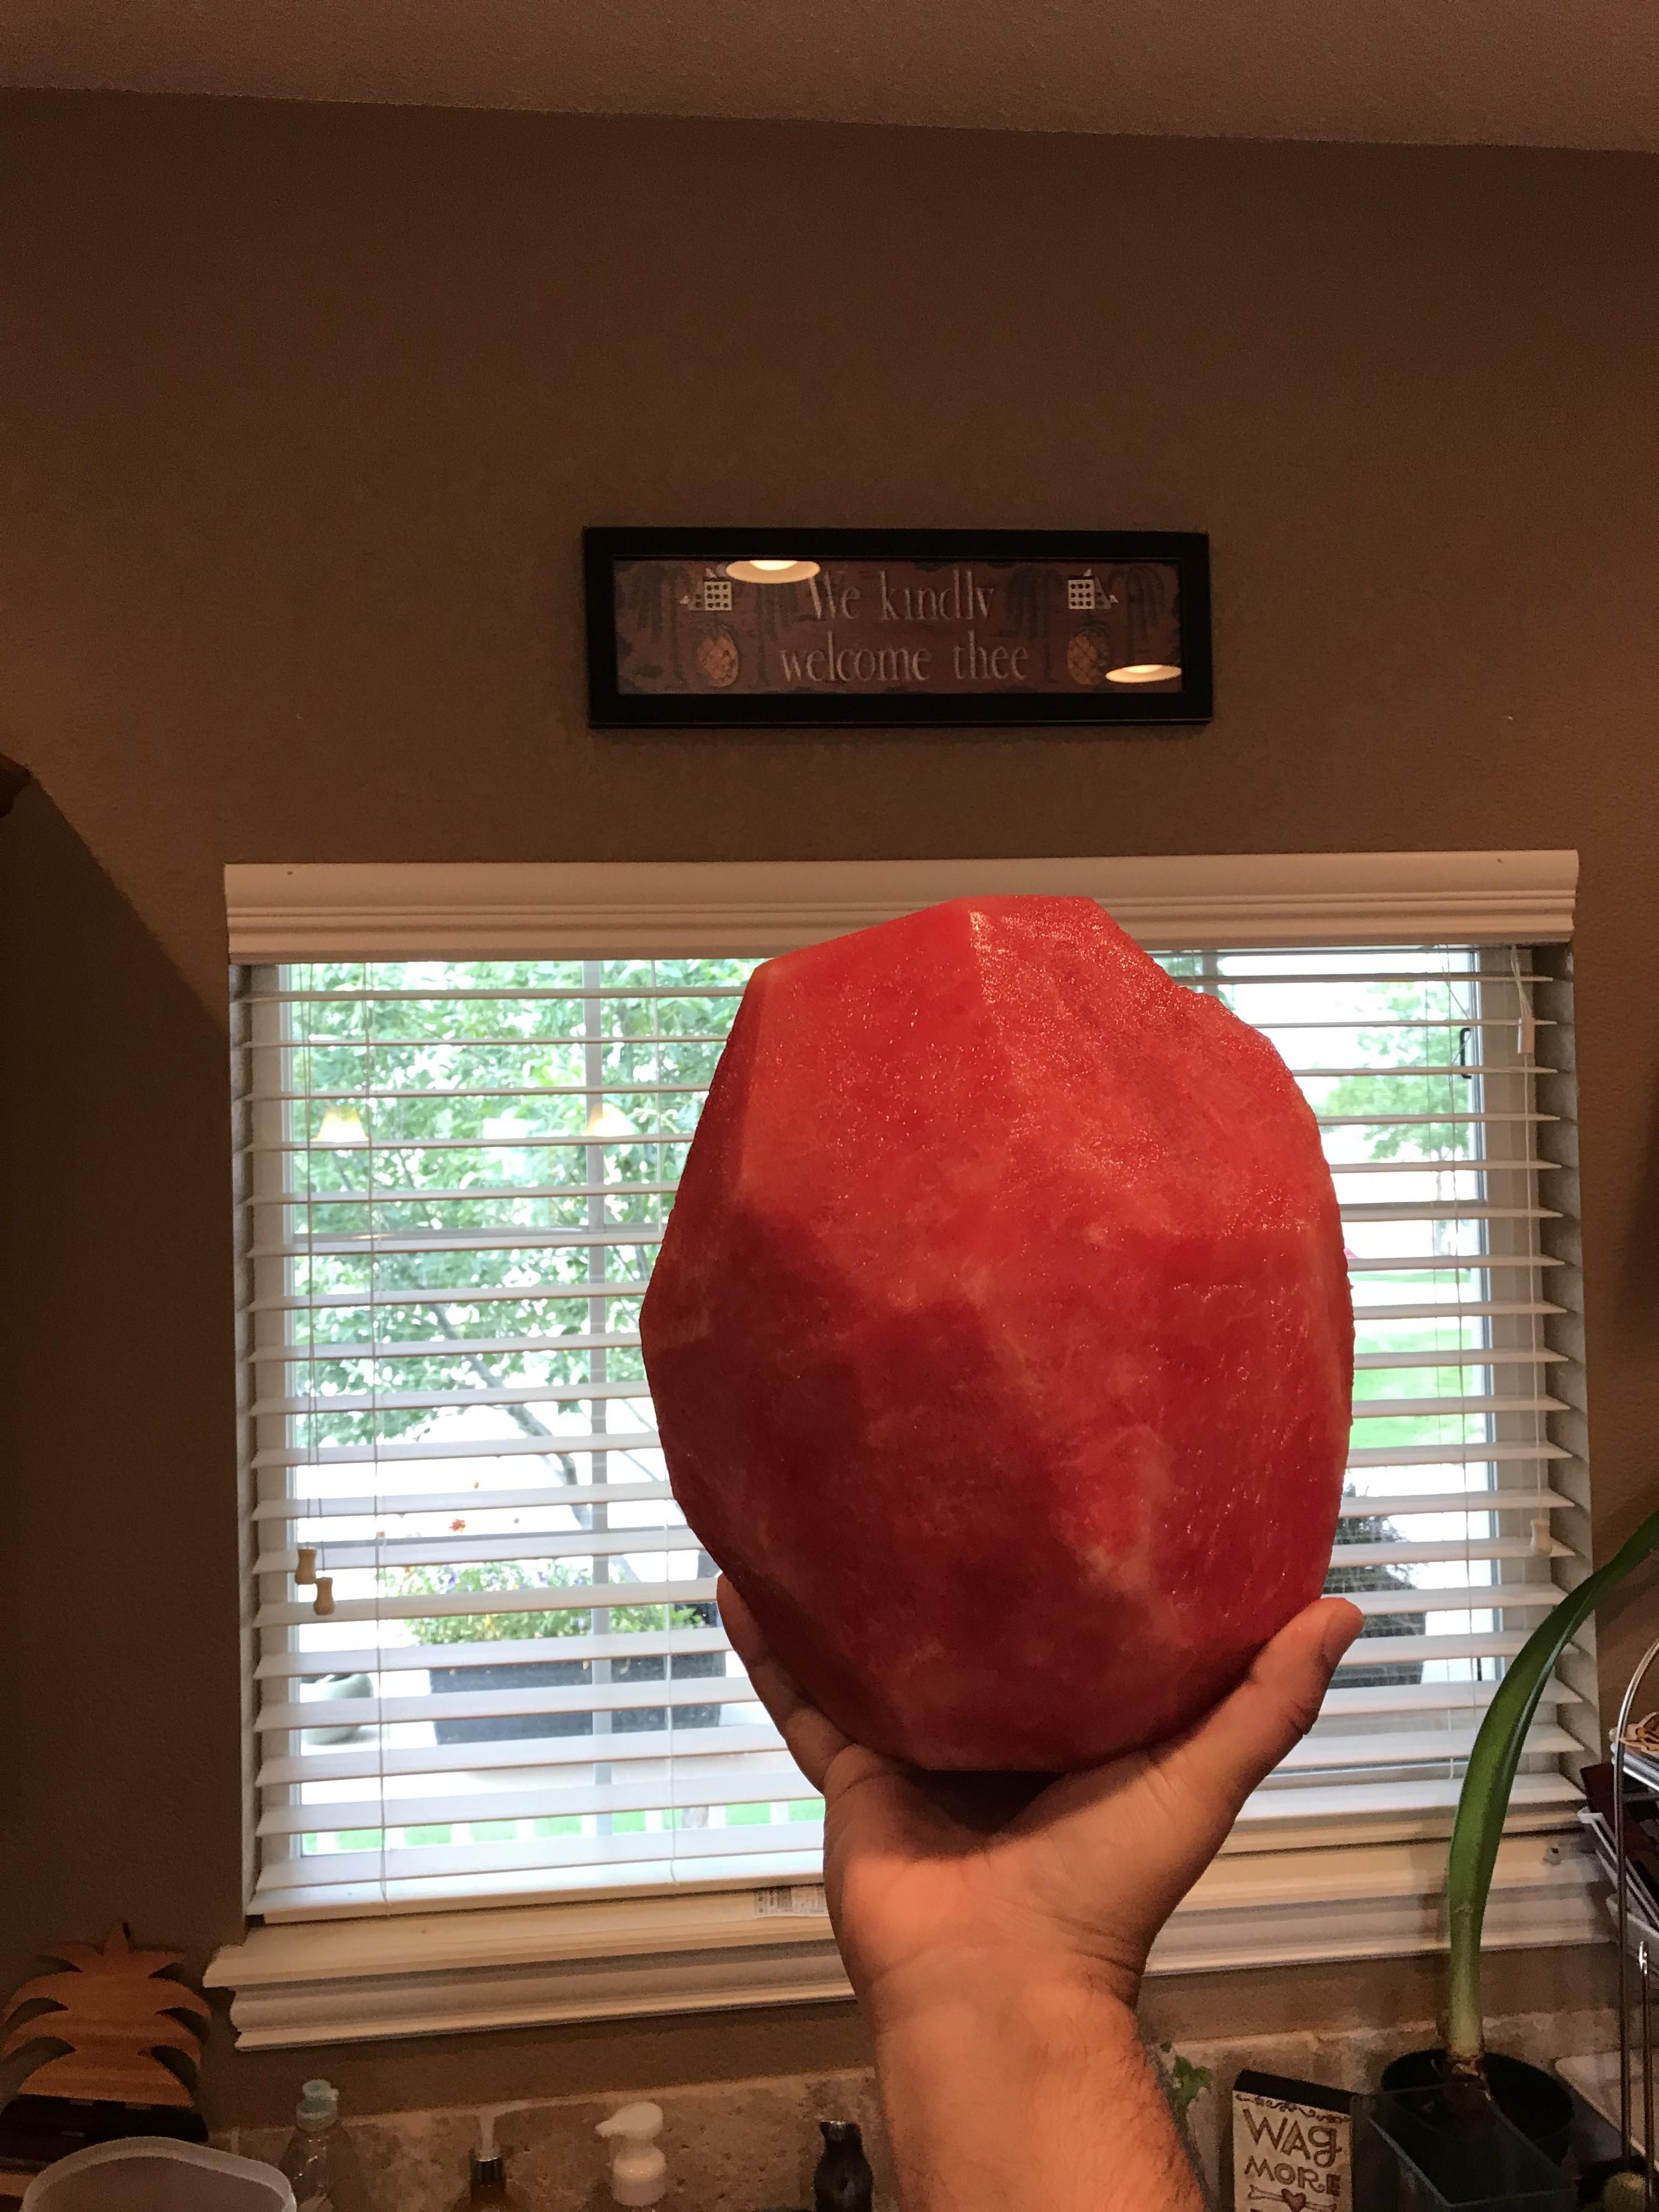 Sometimes when I cut up watermelons I like to cut them into giant rubies and run through the house like I’m Indiana Jones.